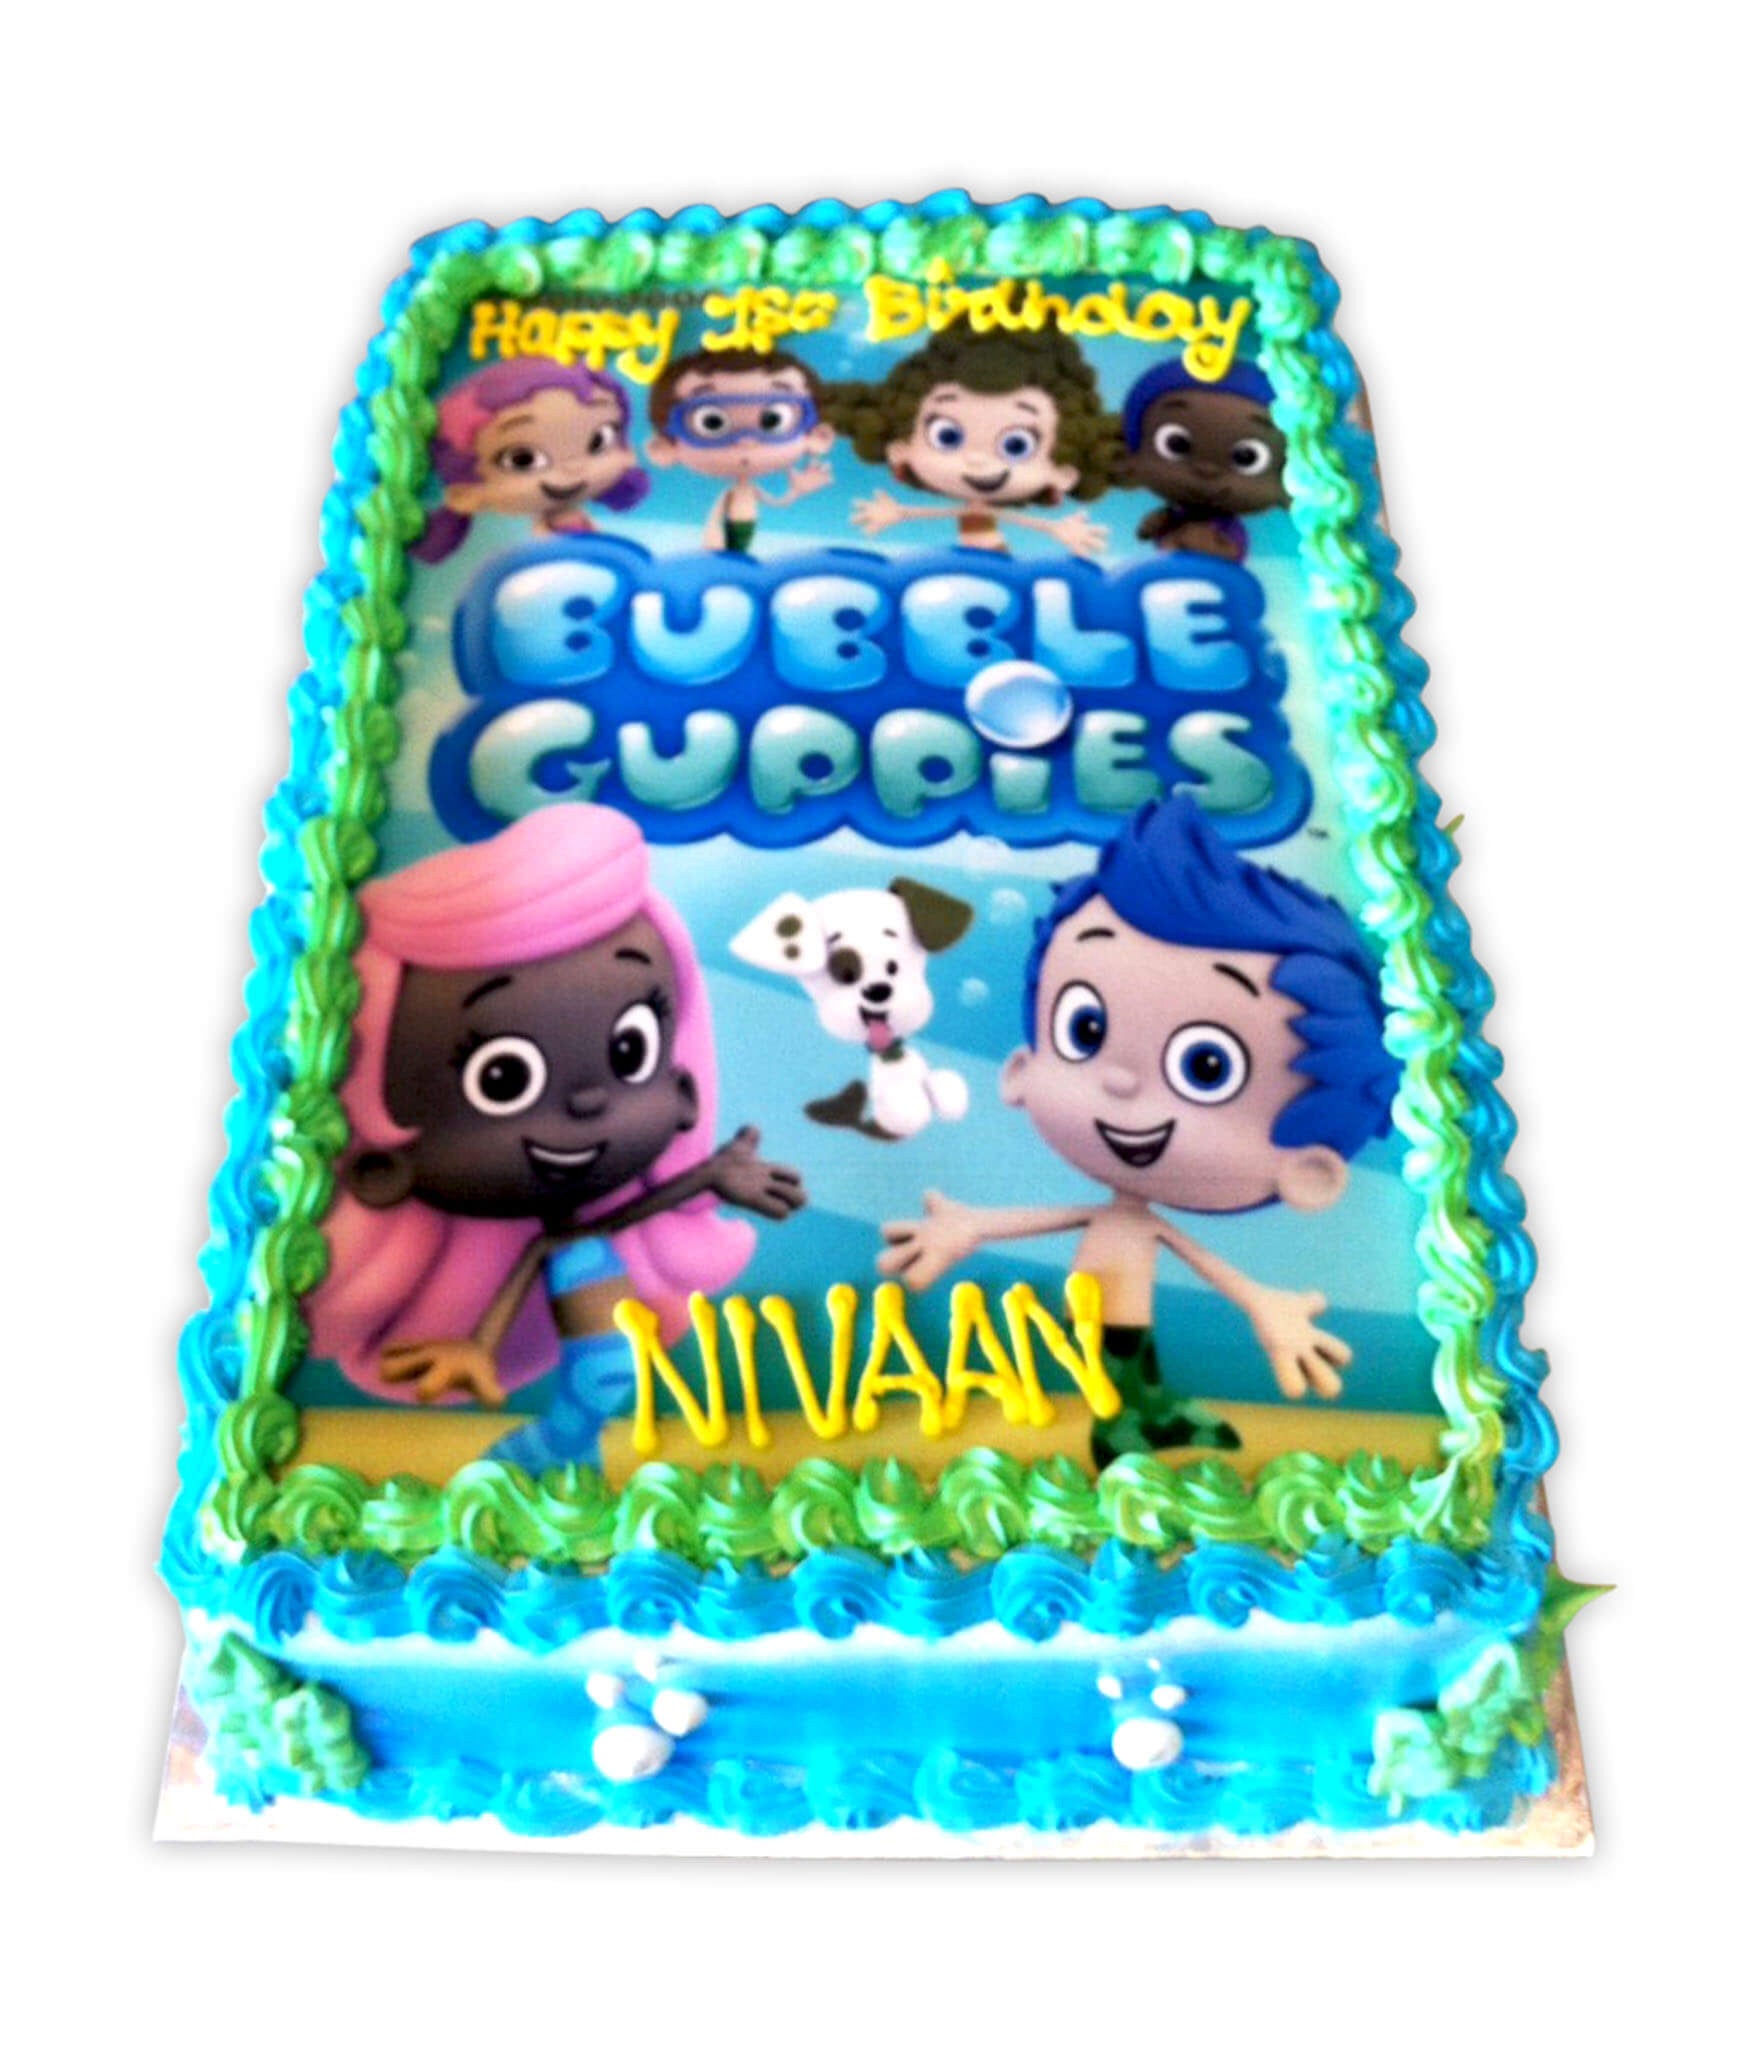 BUBBLE GUPPIES edible cake image party decoration topper frosting shee –  Cakes For Cures